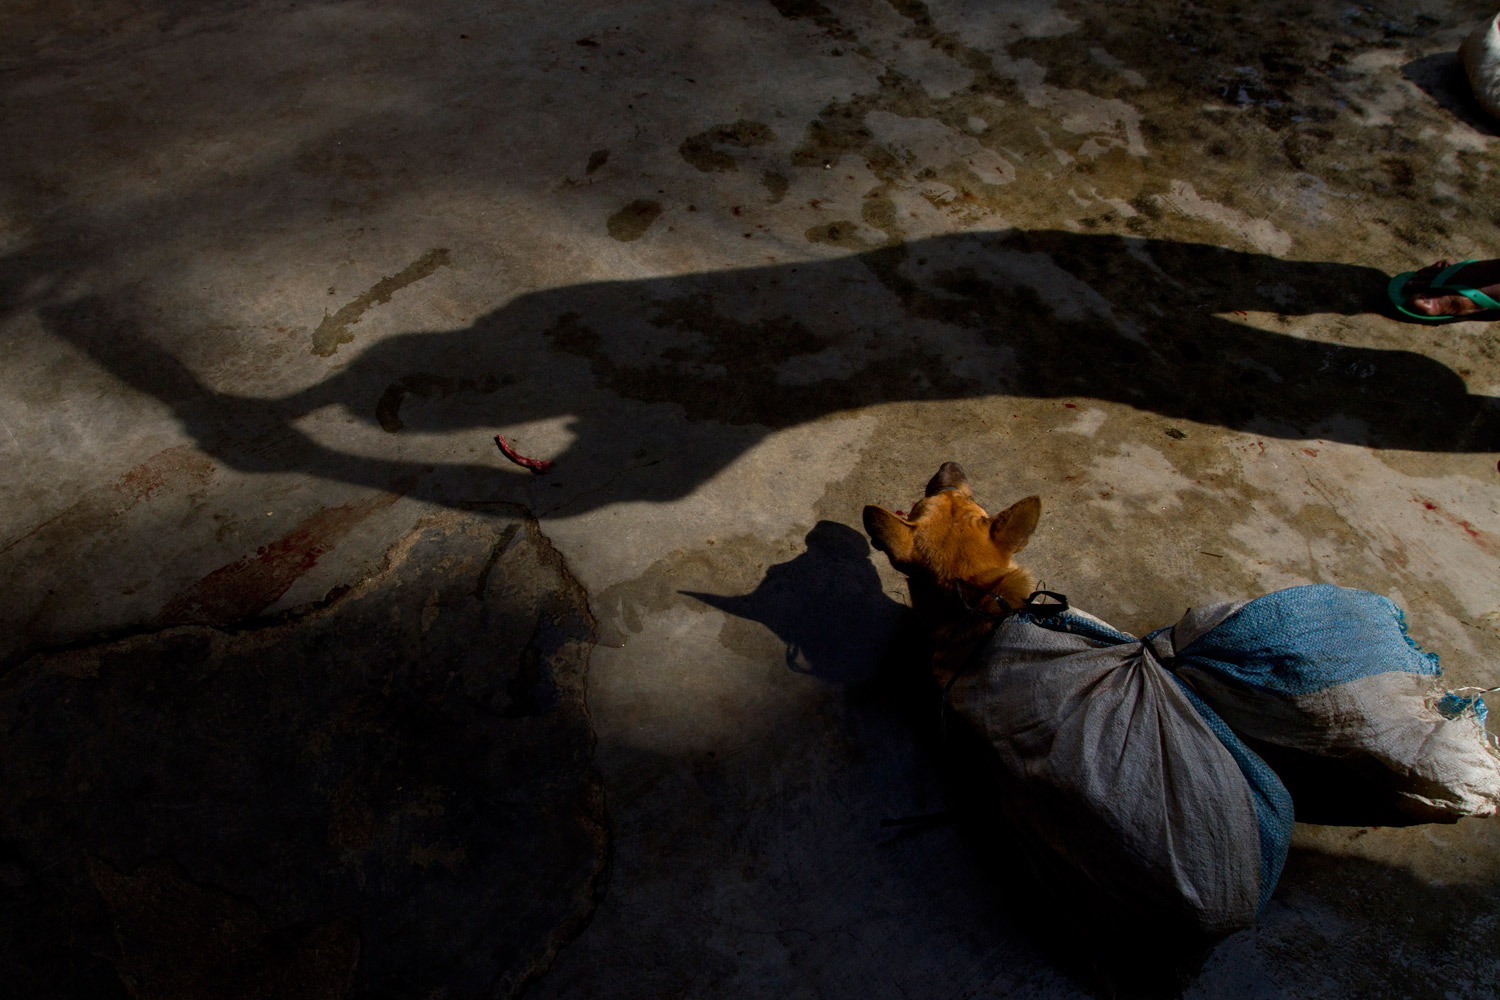 May 29, 2011. The shadow of a worker using a stick to club a dog before slaughter is seen, at Bambanglipuro village in Bantul, near the Indonesian city of Yogyakarta. The Suwardi family has been running a dog slaughter business since 1985, and up to 30 dogs are killed everyday for their meat, which consumers believe can cure skin diseases and boost vitality.